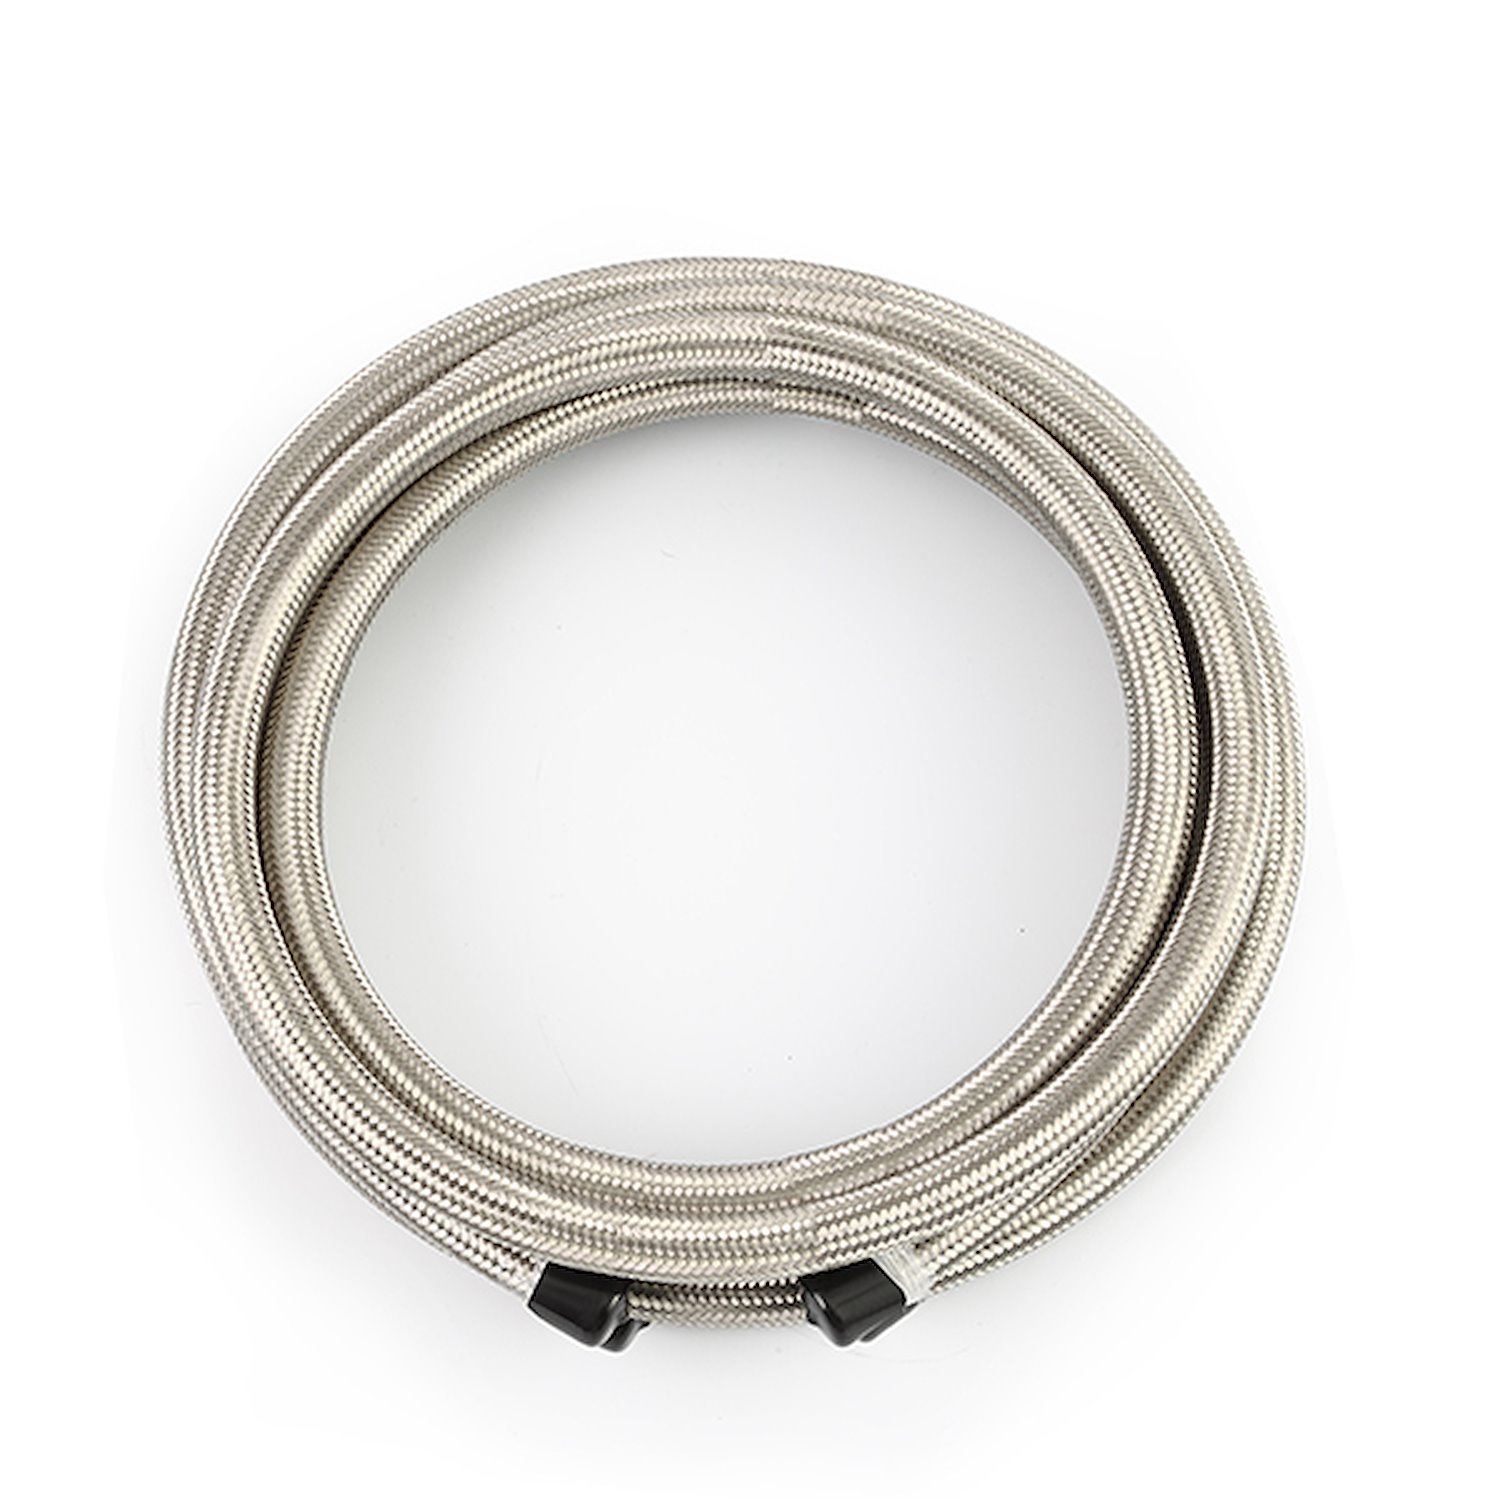 4AN 15 FT. HOSE STAINLESS